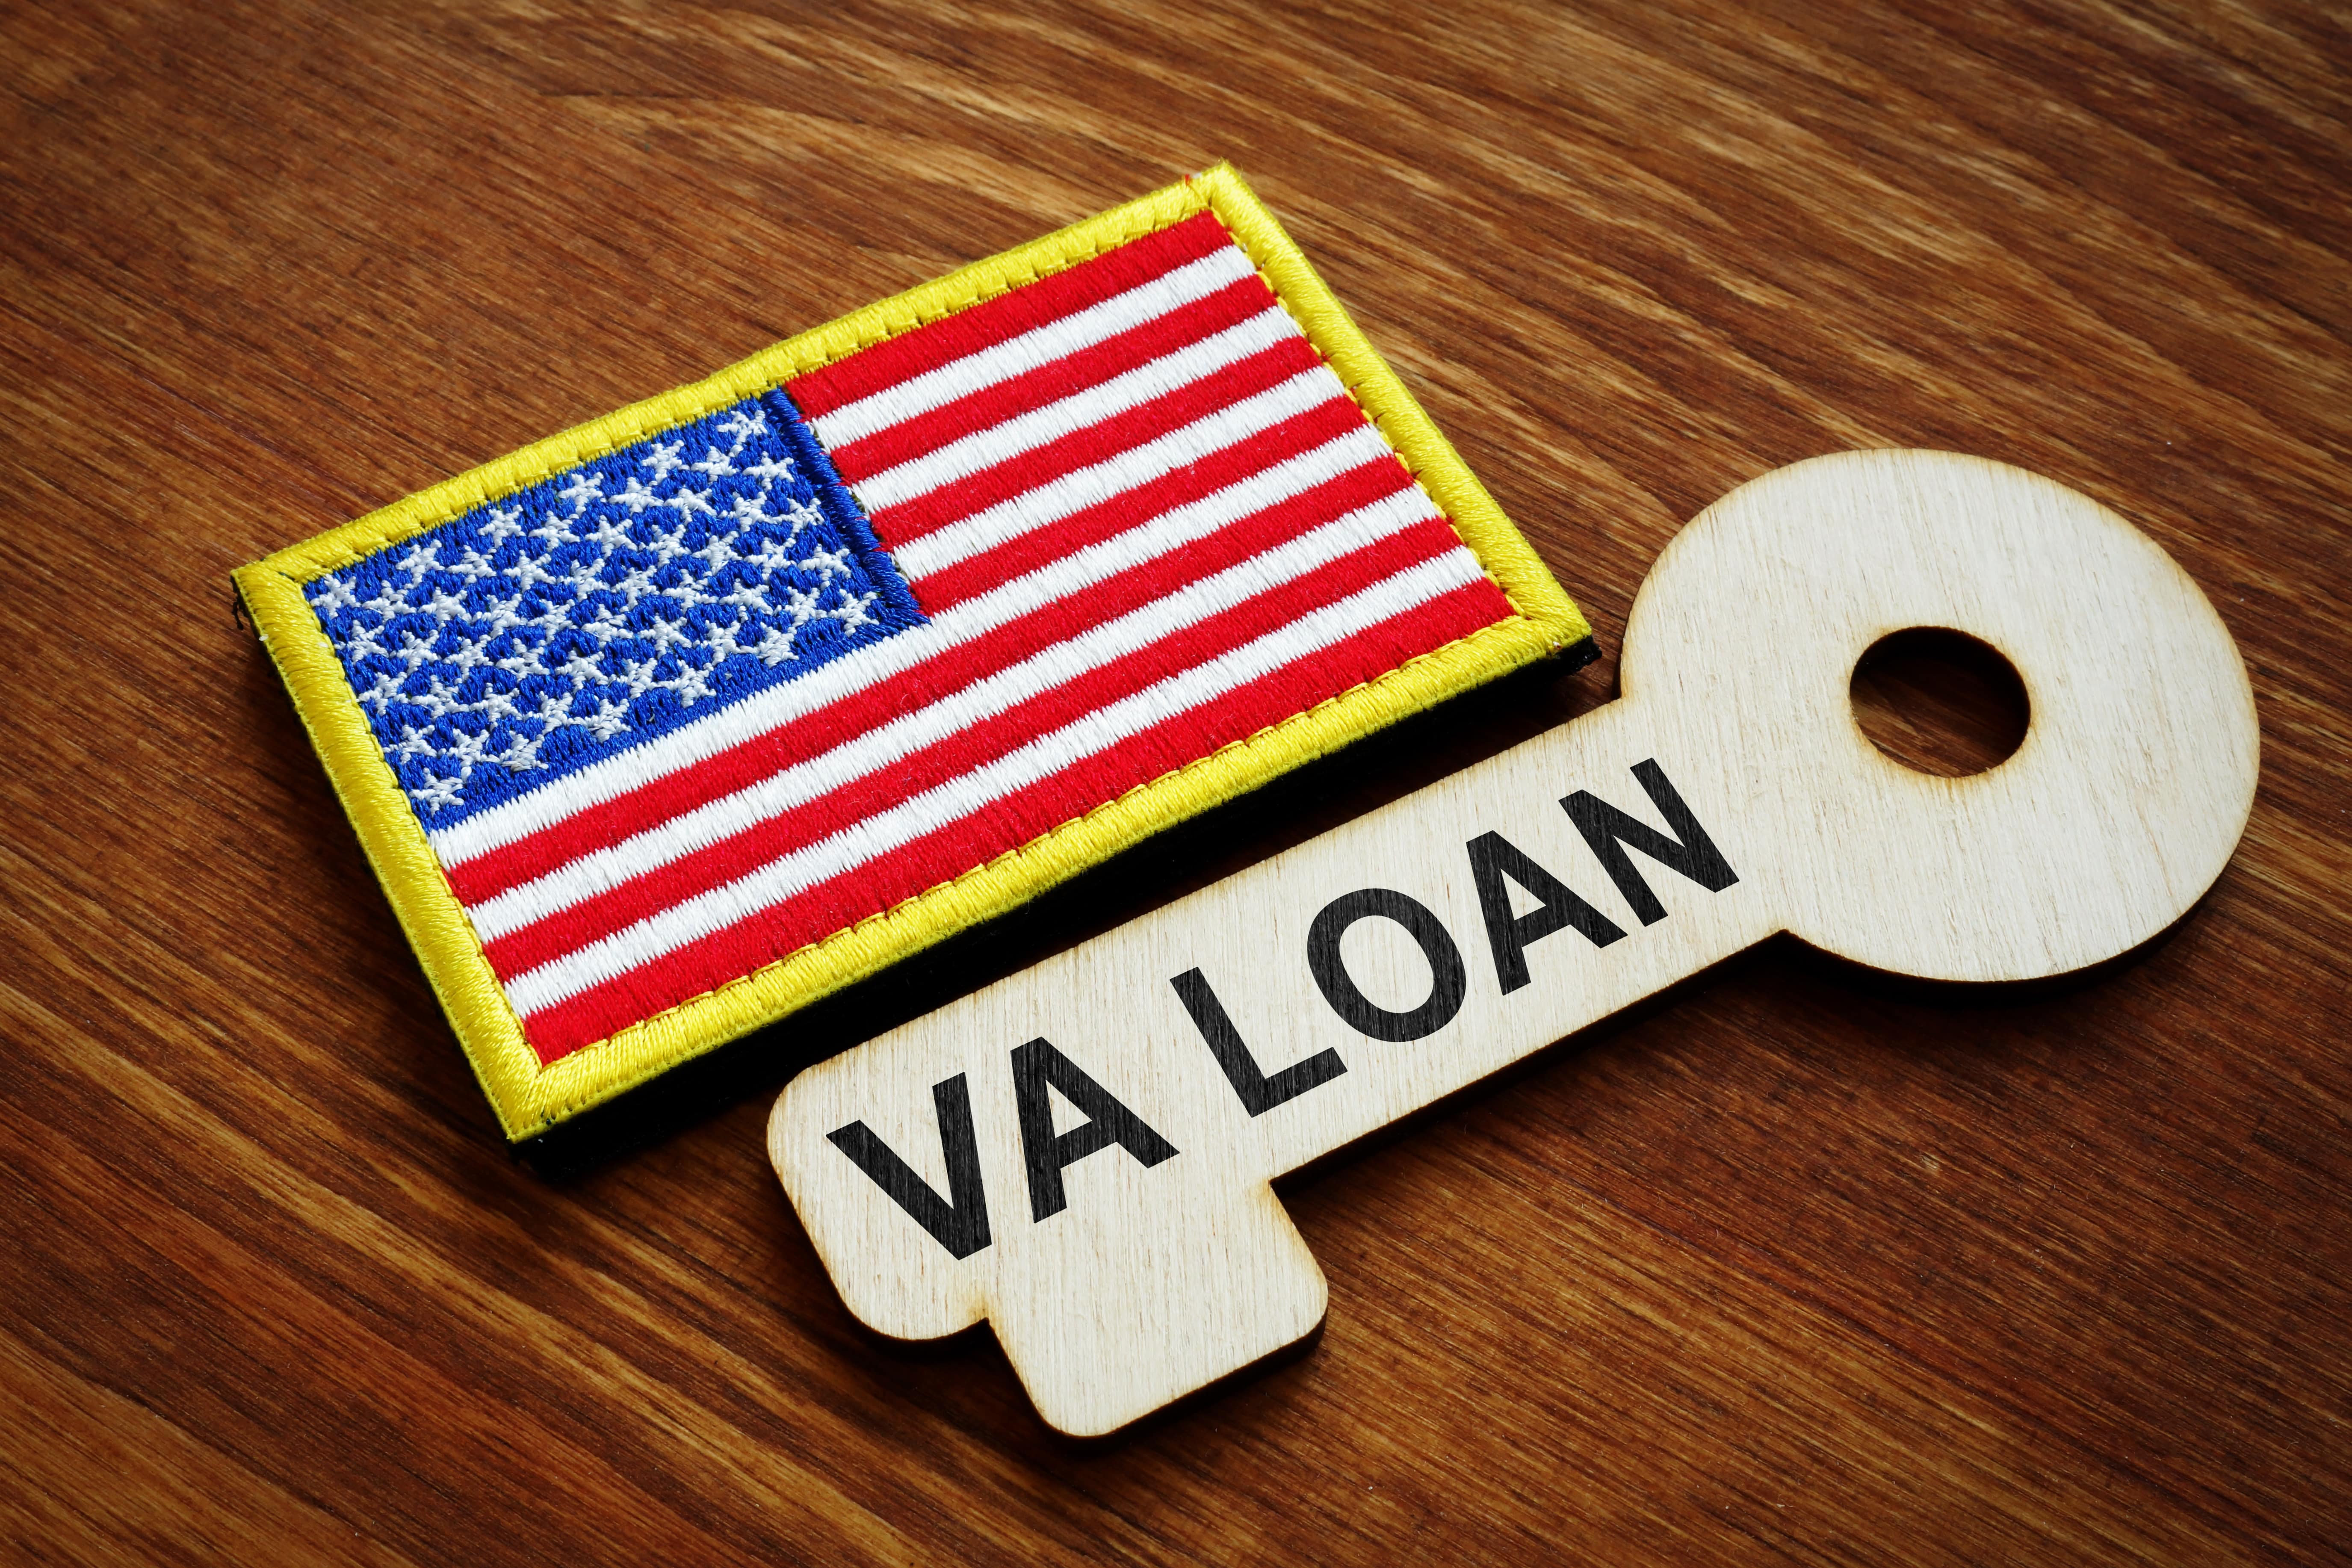 VA loan written on a wooden key and the American flag on a uniform badge.